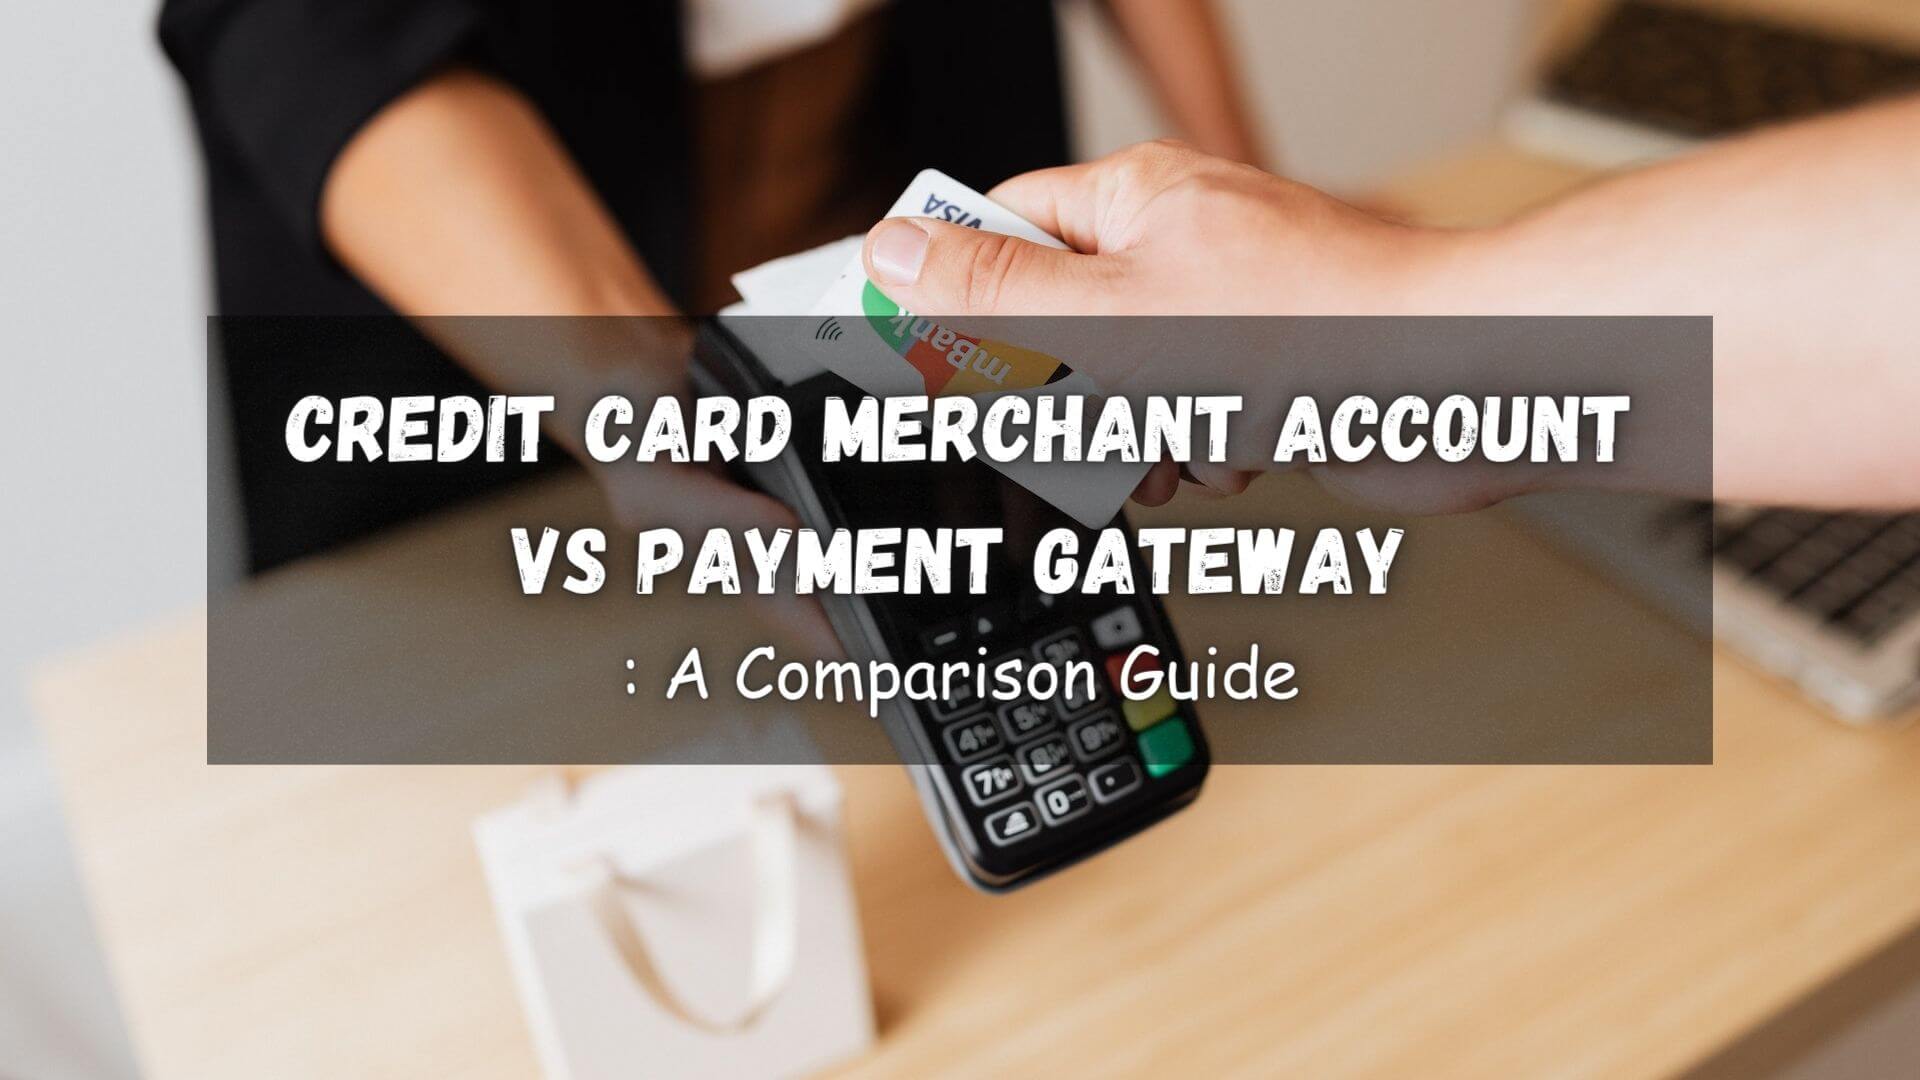 Credit Card Merchant Account vs. Payment Gateway, they both play a crucial role in the modern business landscape. Here's how they differ!